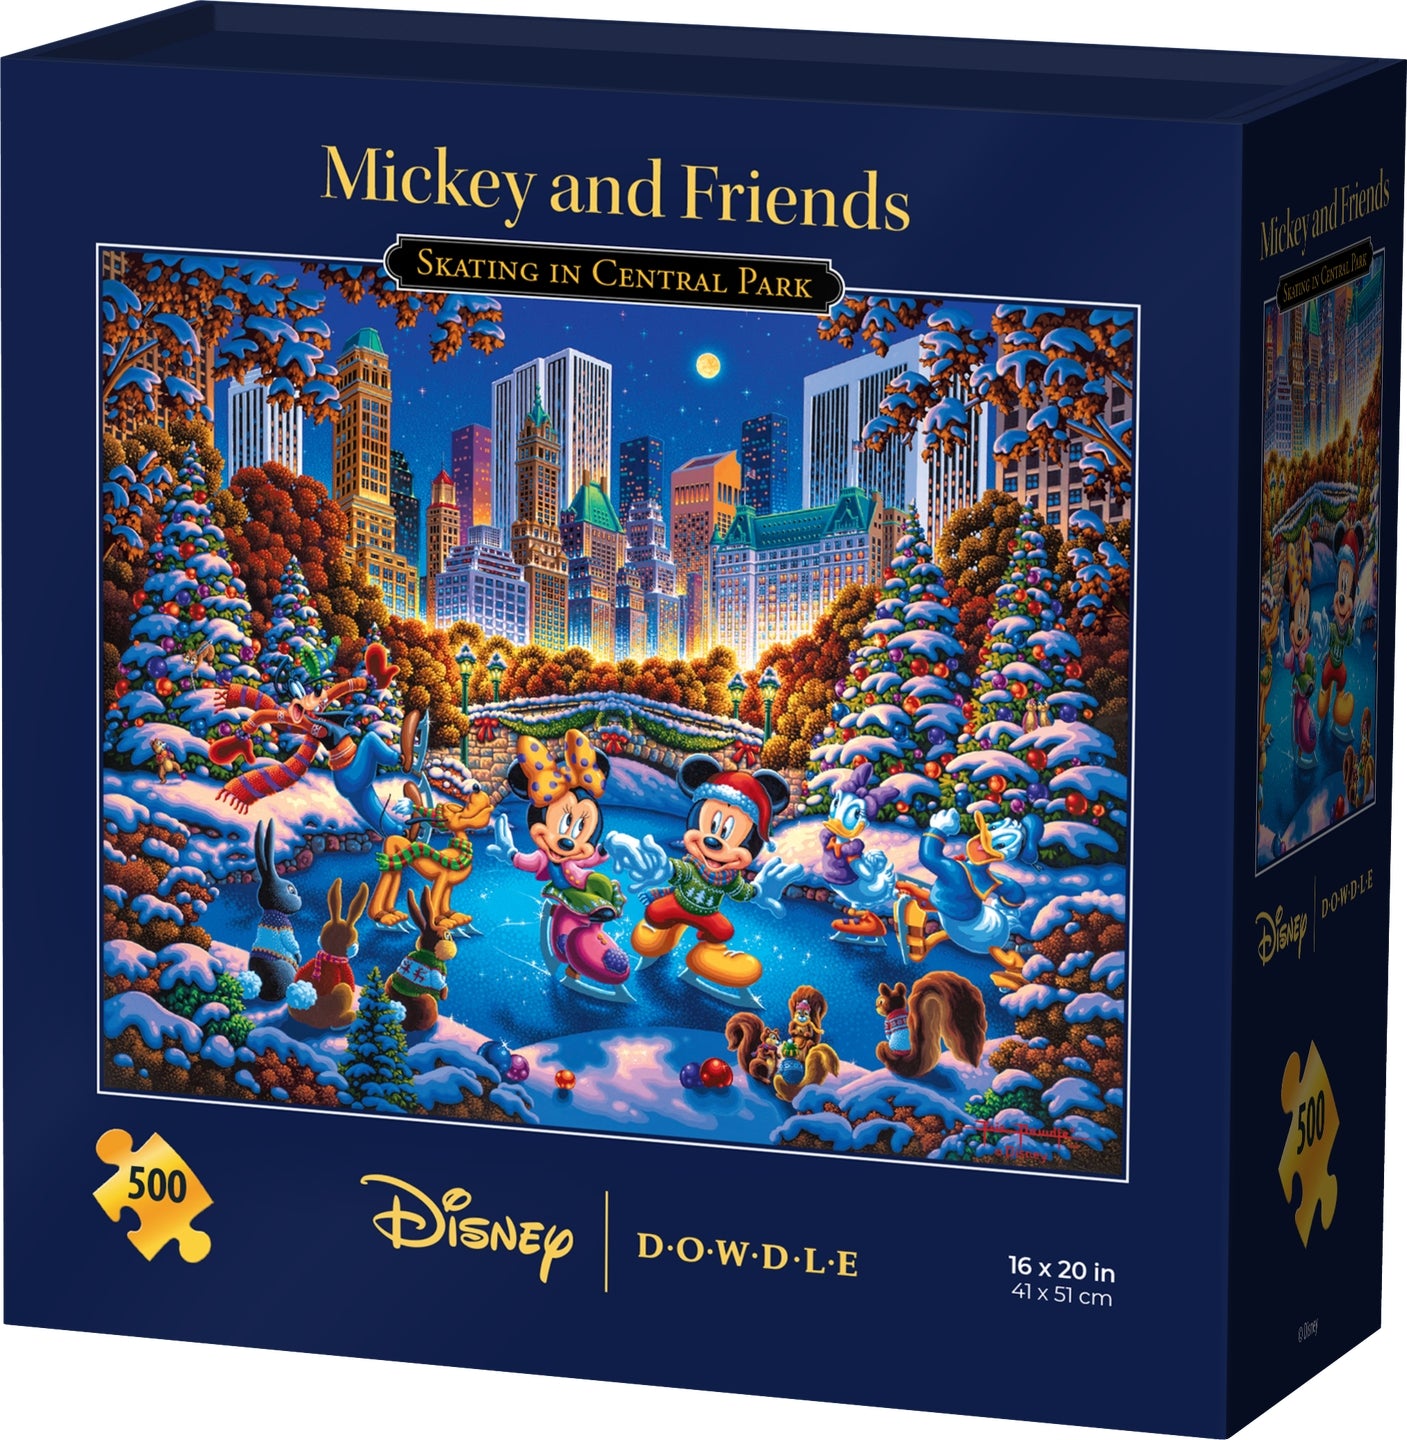 Mickey & Friends Skating in Central Park - 500 Piece Disney Dowdle Jigsaw  Puzzle